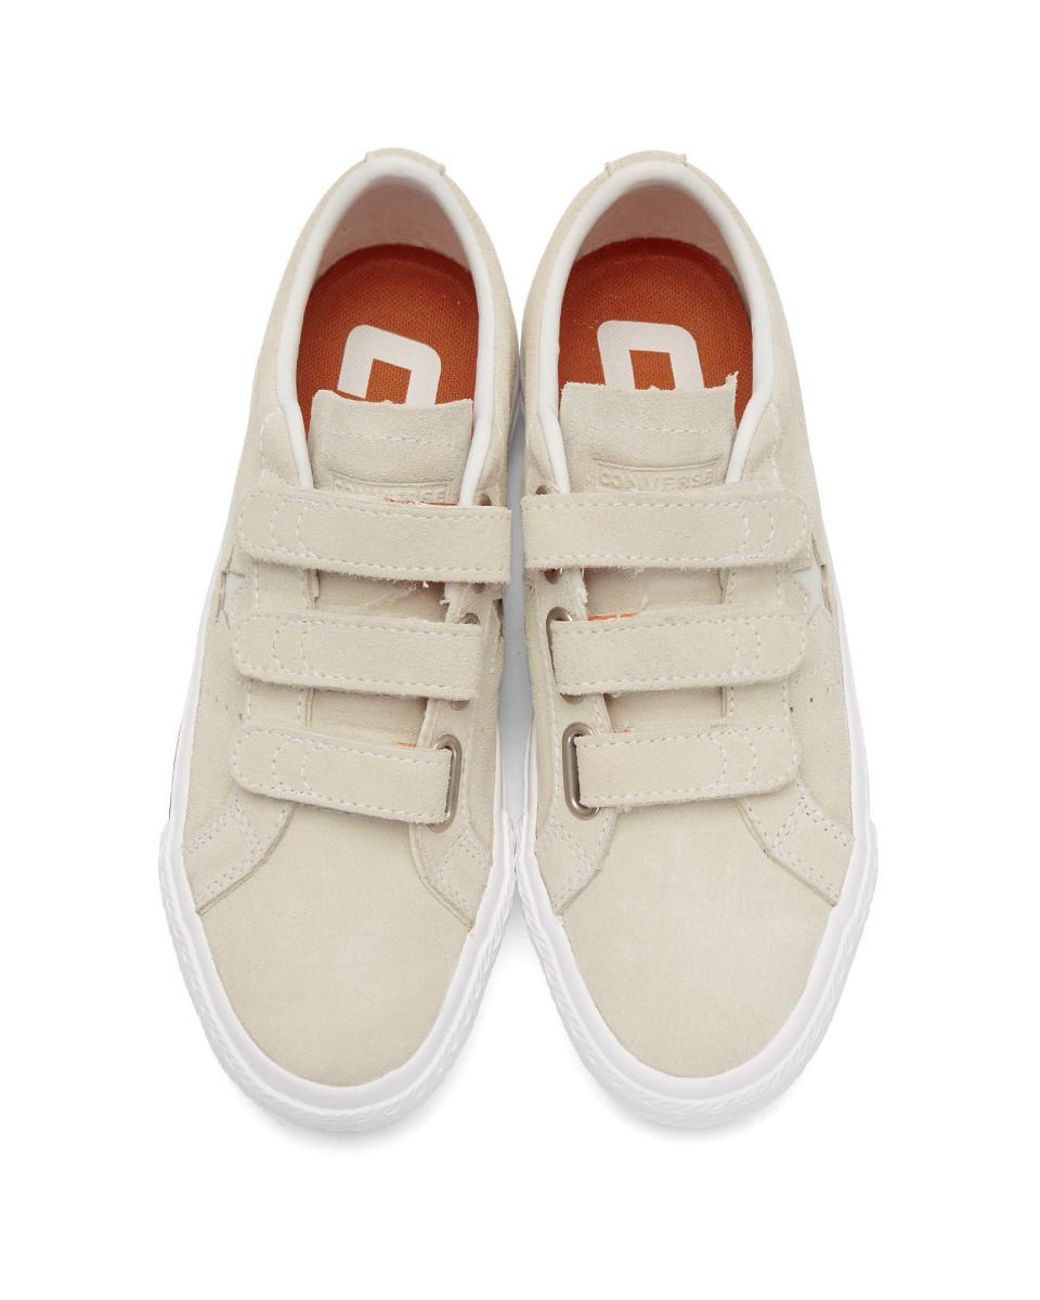 Converse Off-white One Sneakers for Men Lyst